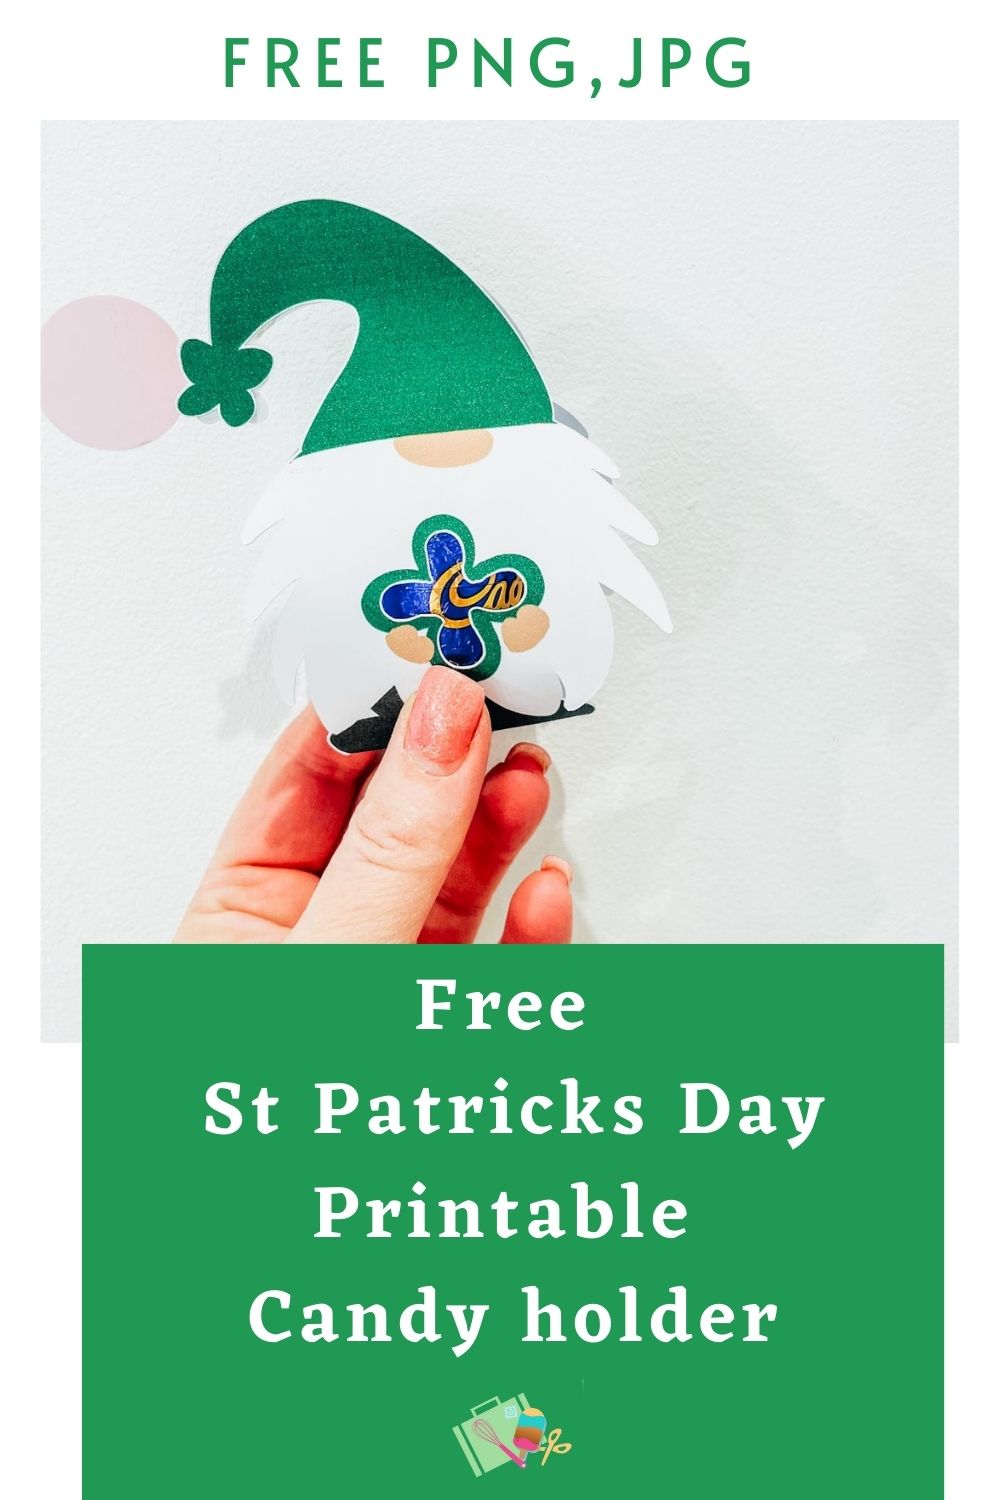 Free Printable Patricks day gnome Candy Holder For Cricut and to cut out by hand-2